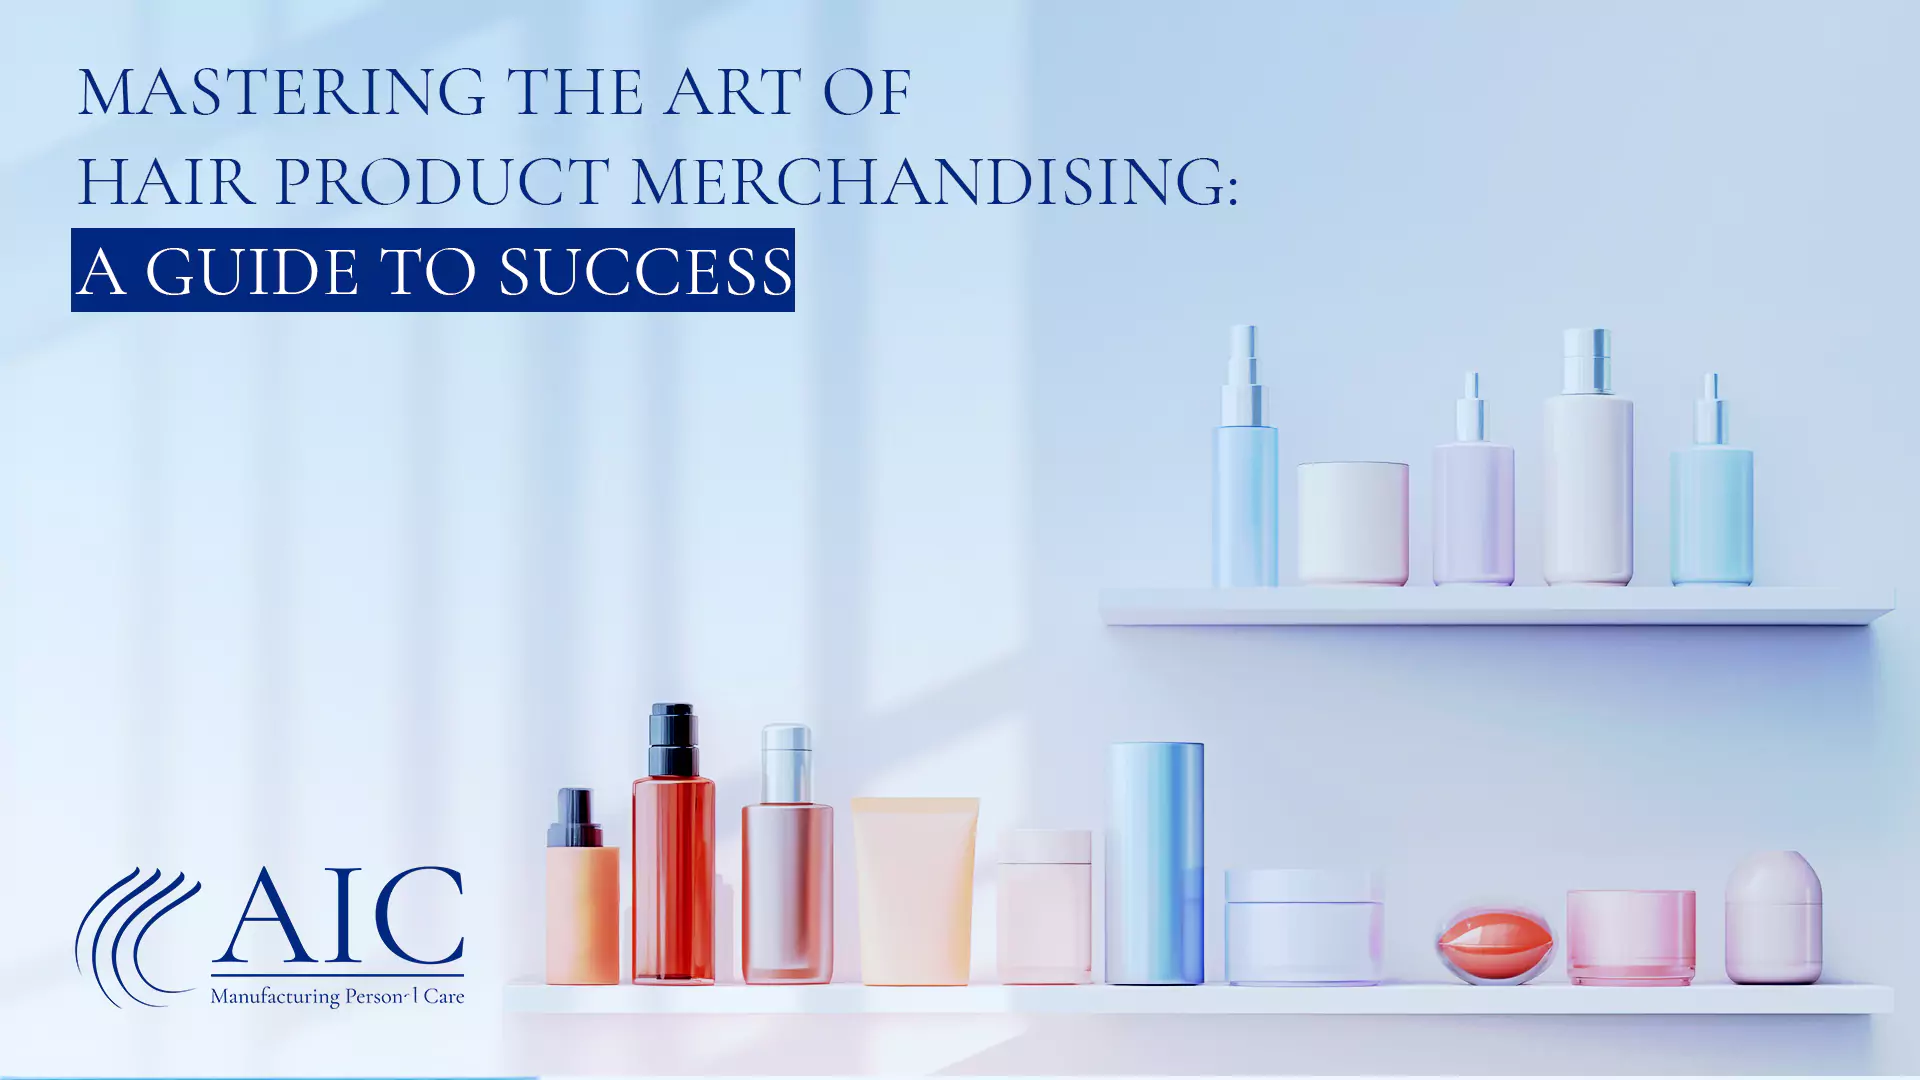 Mastering the Art of Hair Care Product Merchandising: A Guide to Success